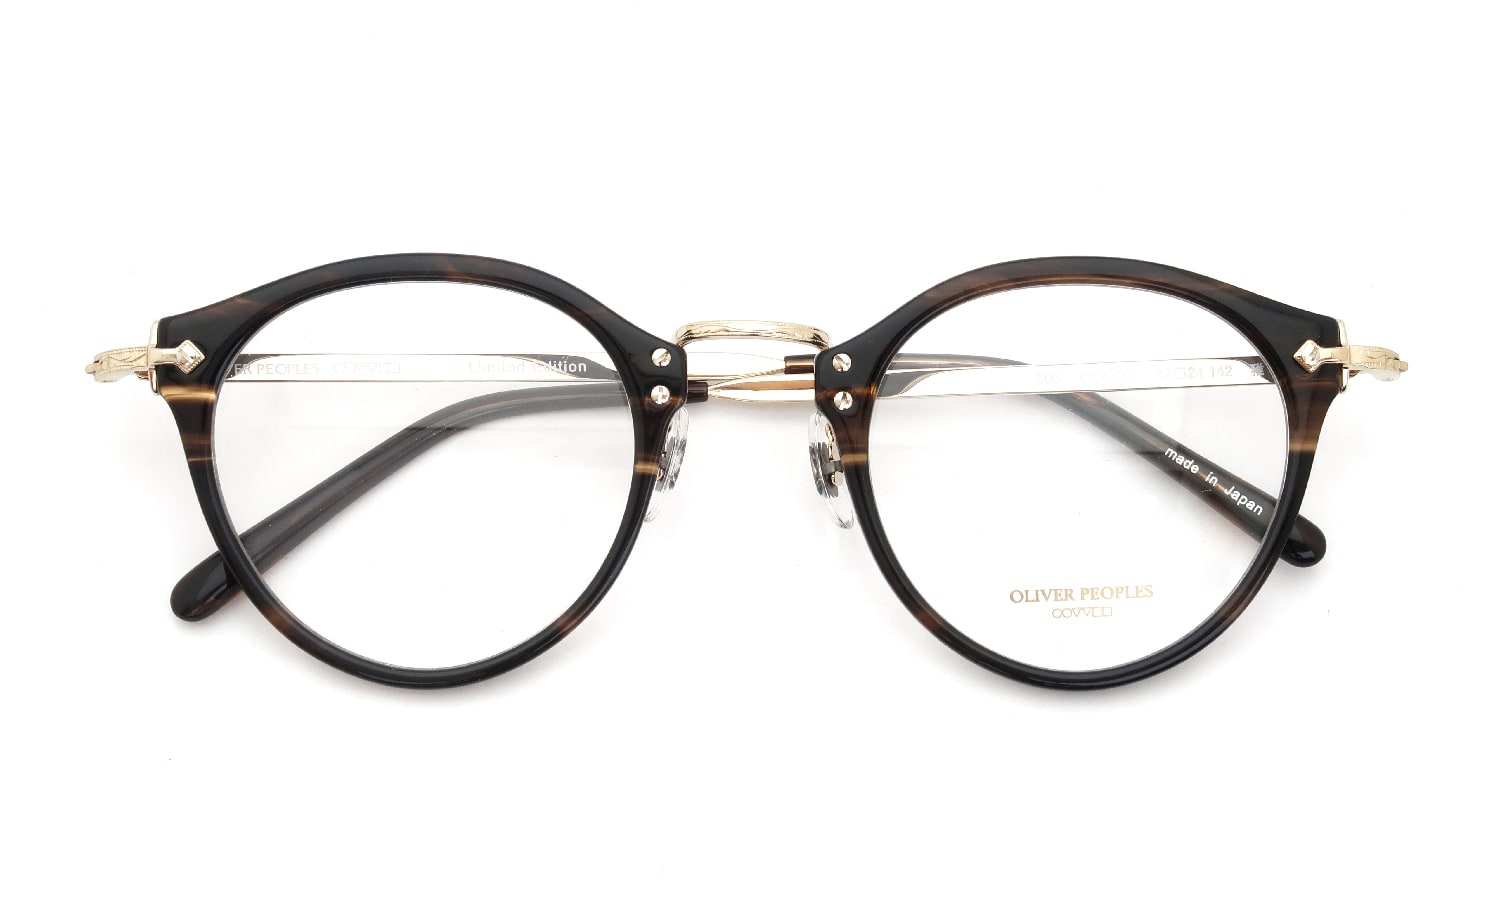 OLIVER PEOPLES 505 COCO2